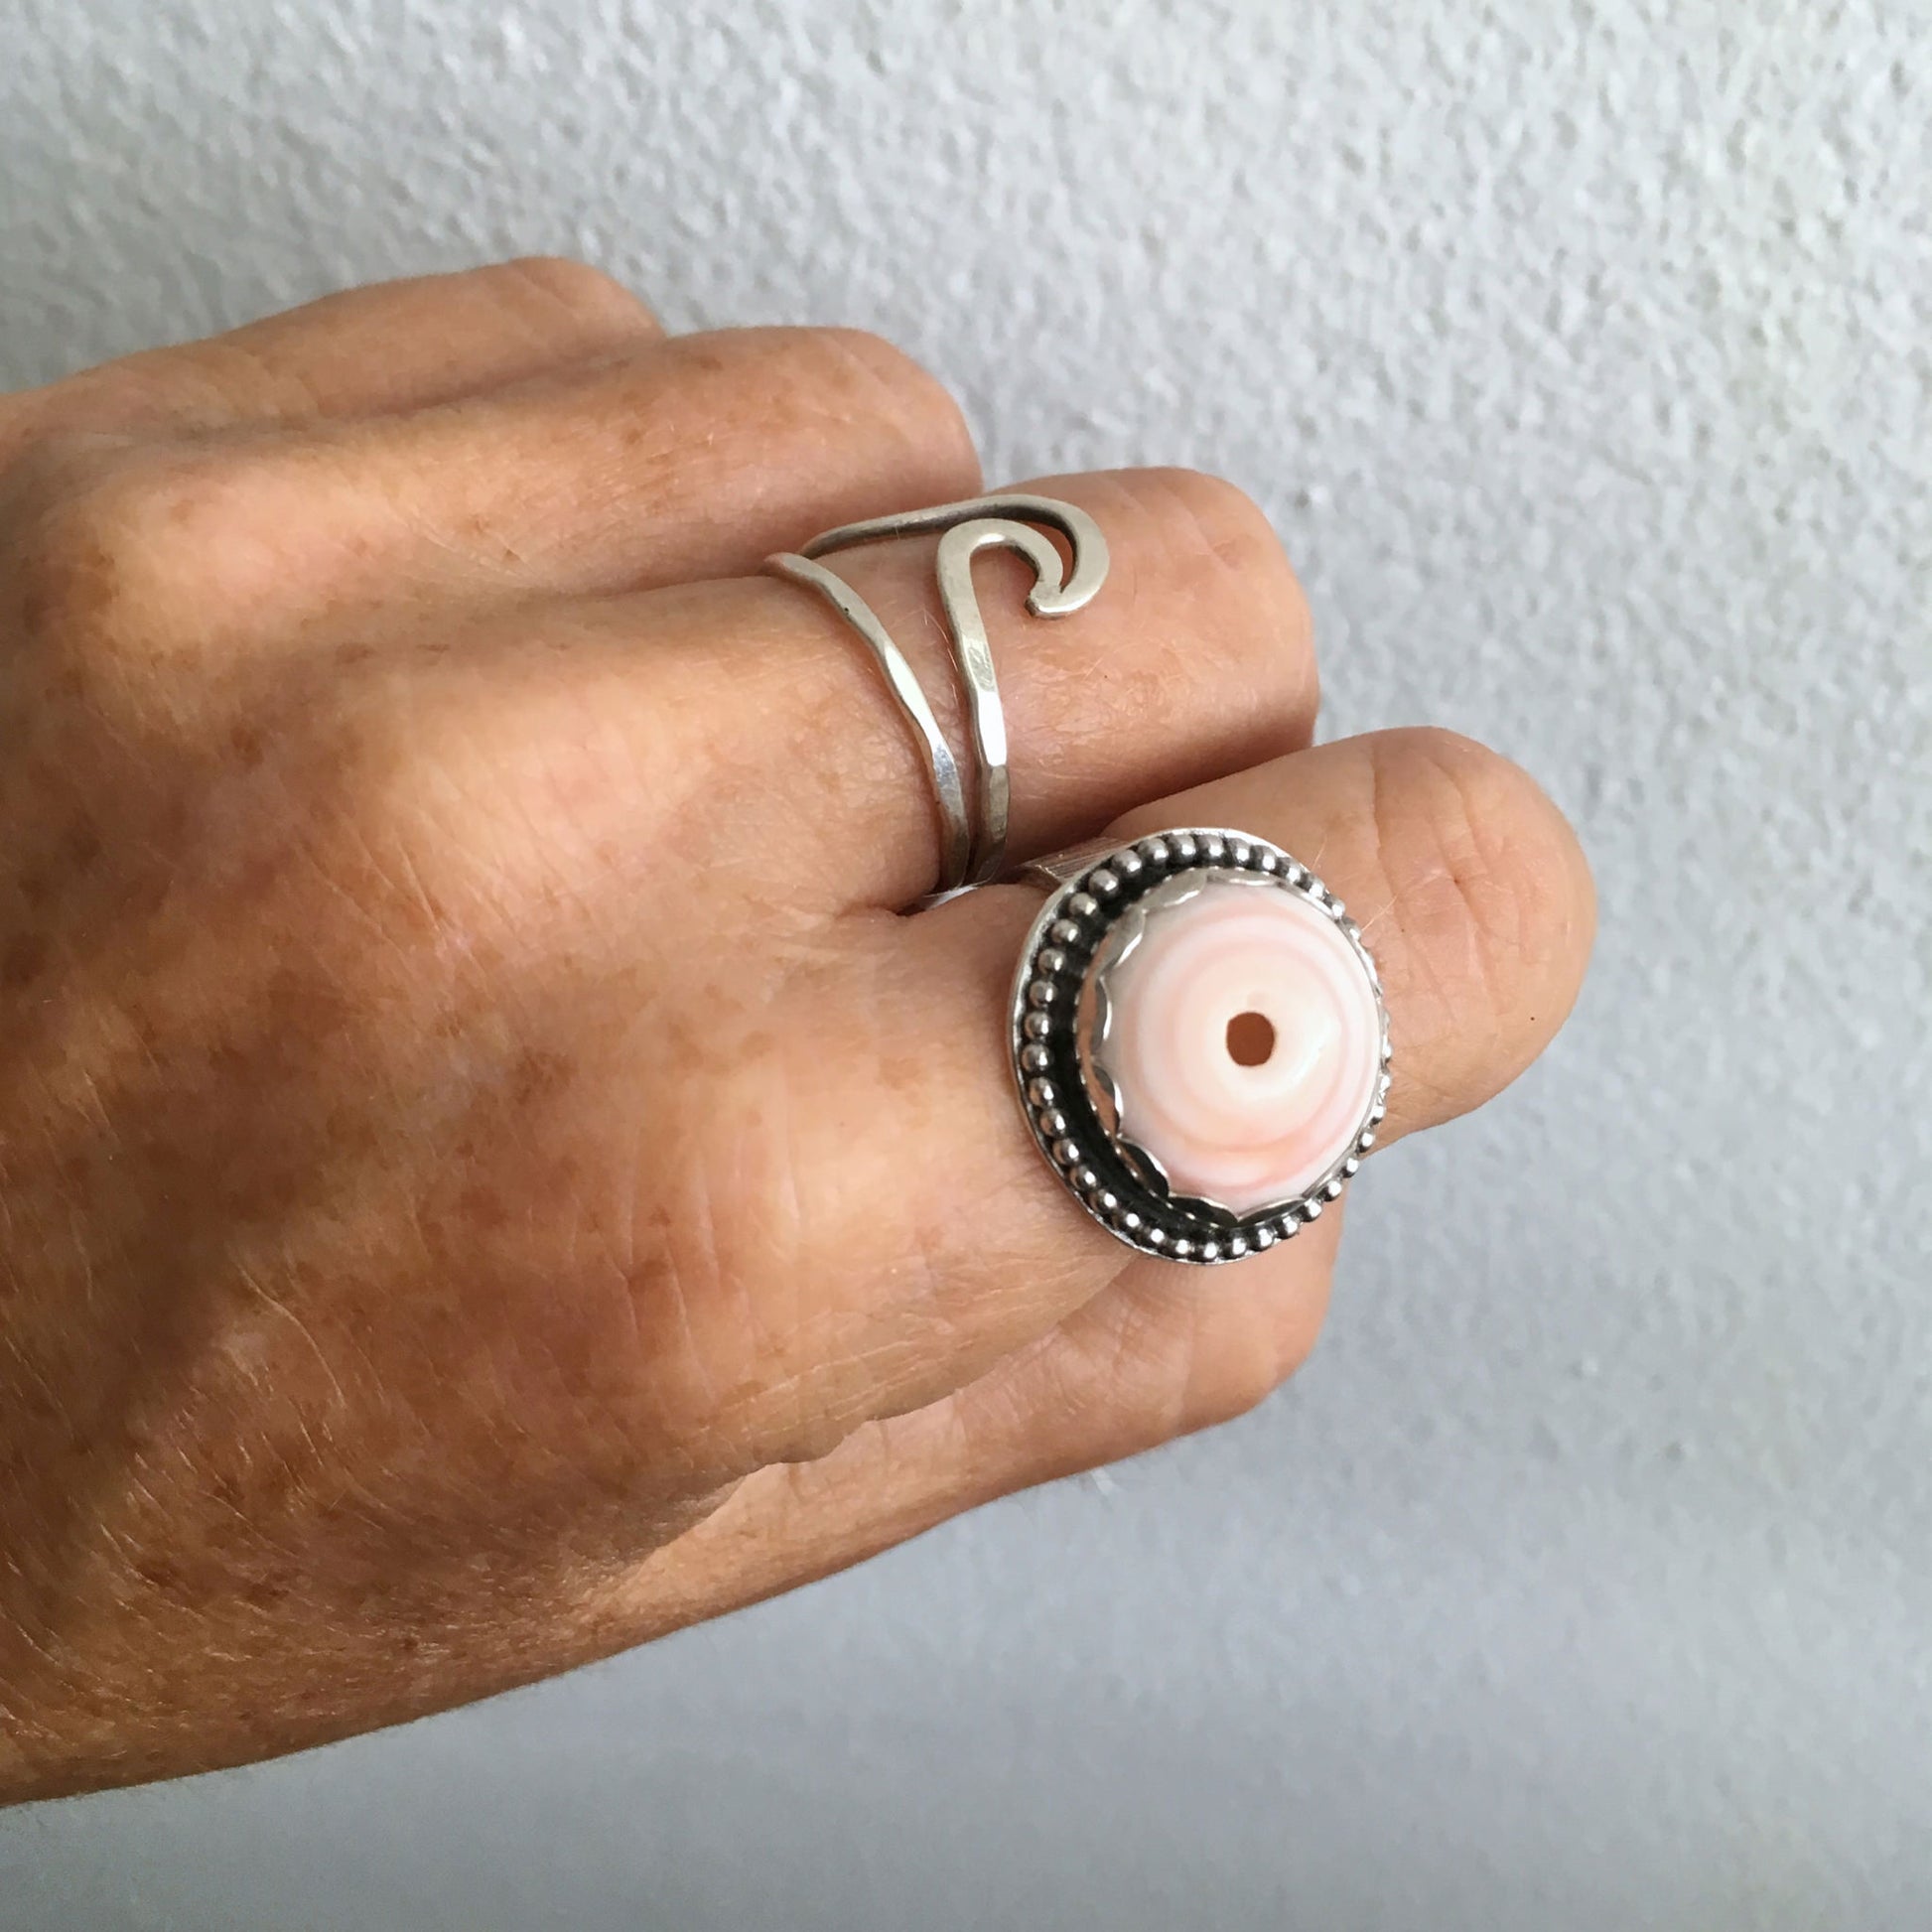 Rare-Puka-Shell-Ring-by-SpecialJCreations-Shown-On-Hand